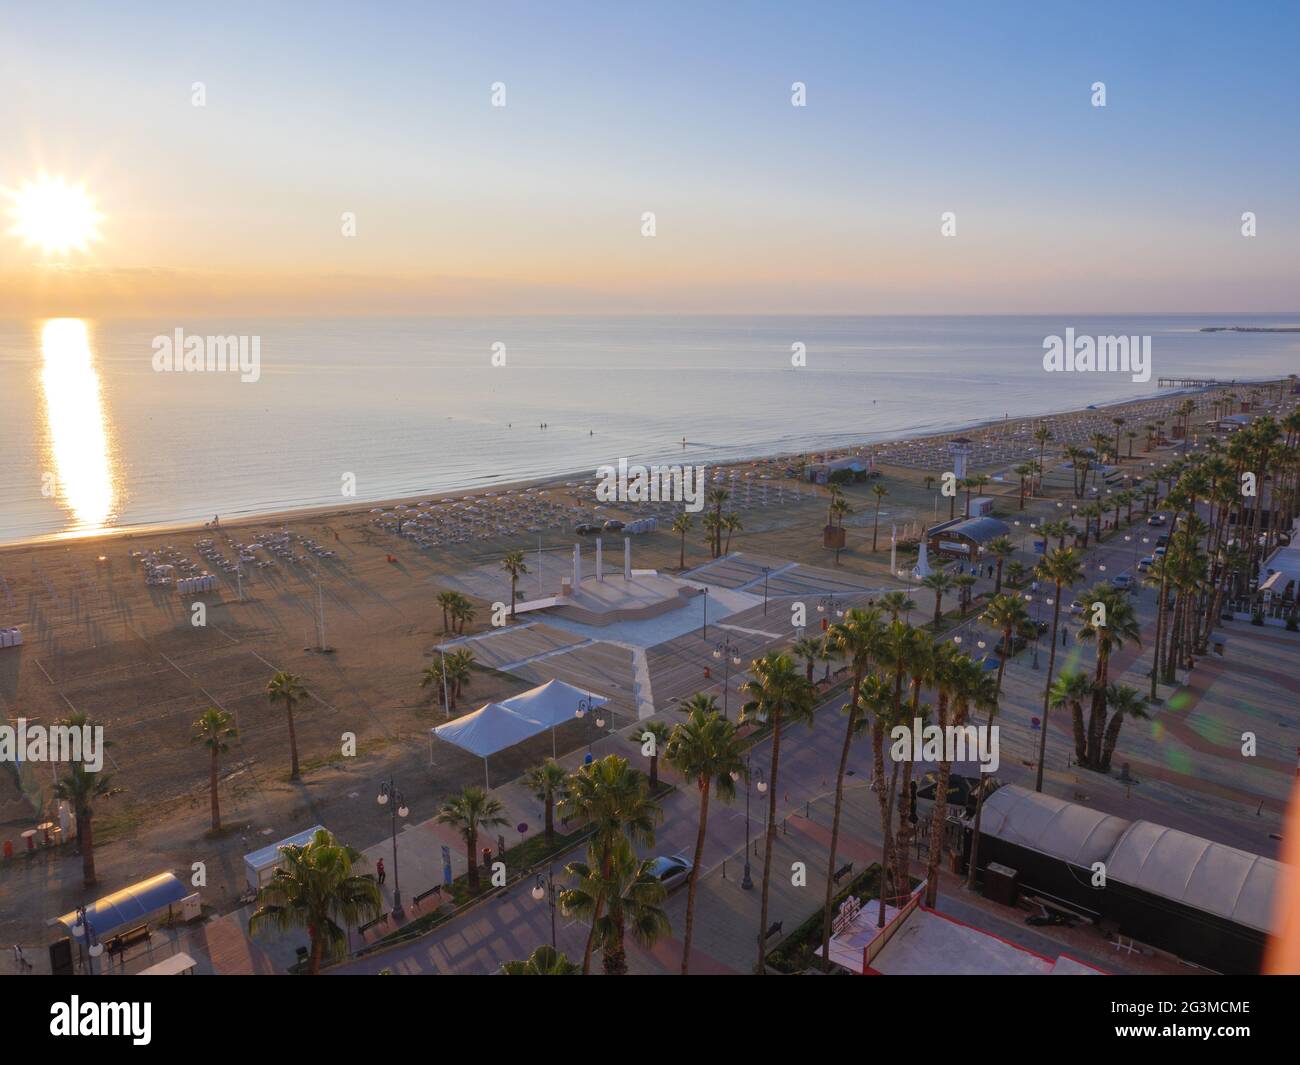 Top aerial view overlooking the break of the day at the Finnikoudes palm tree promenade in Larnaca old town, Cyprus. Rising sun glade at sea surface. Stock Photo